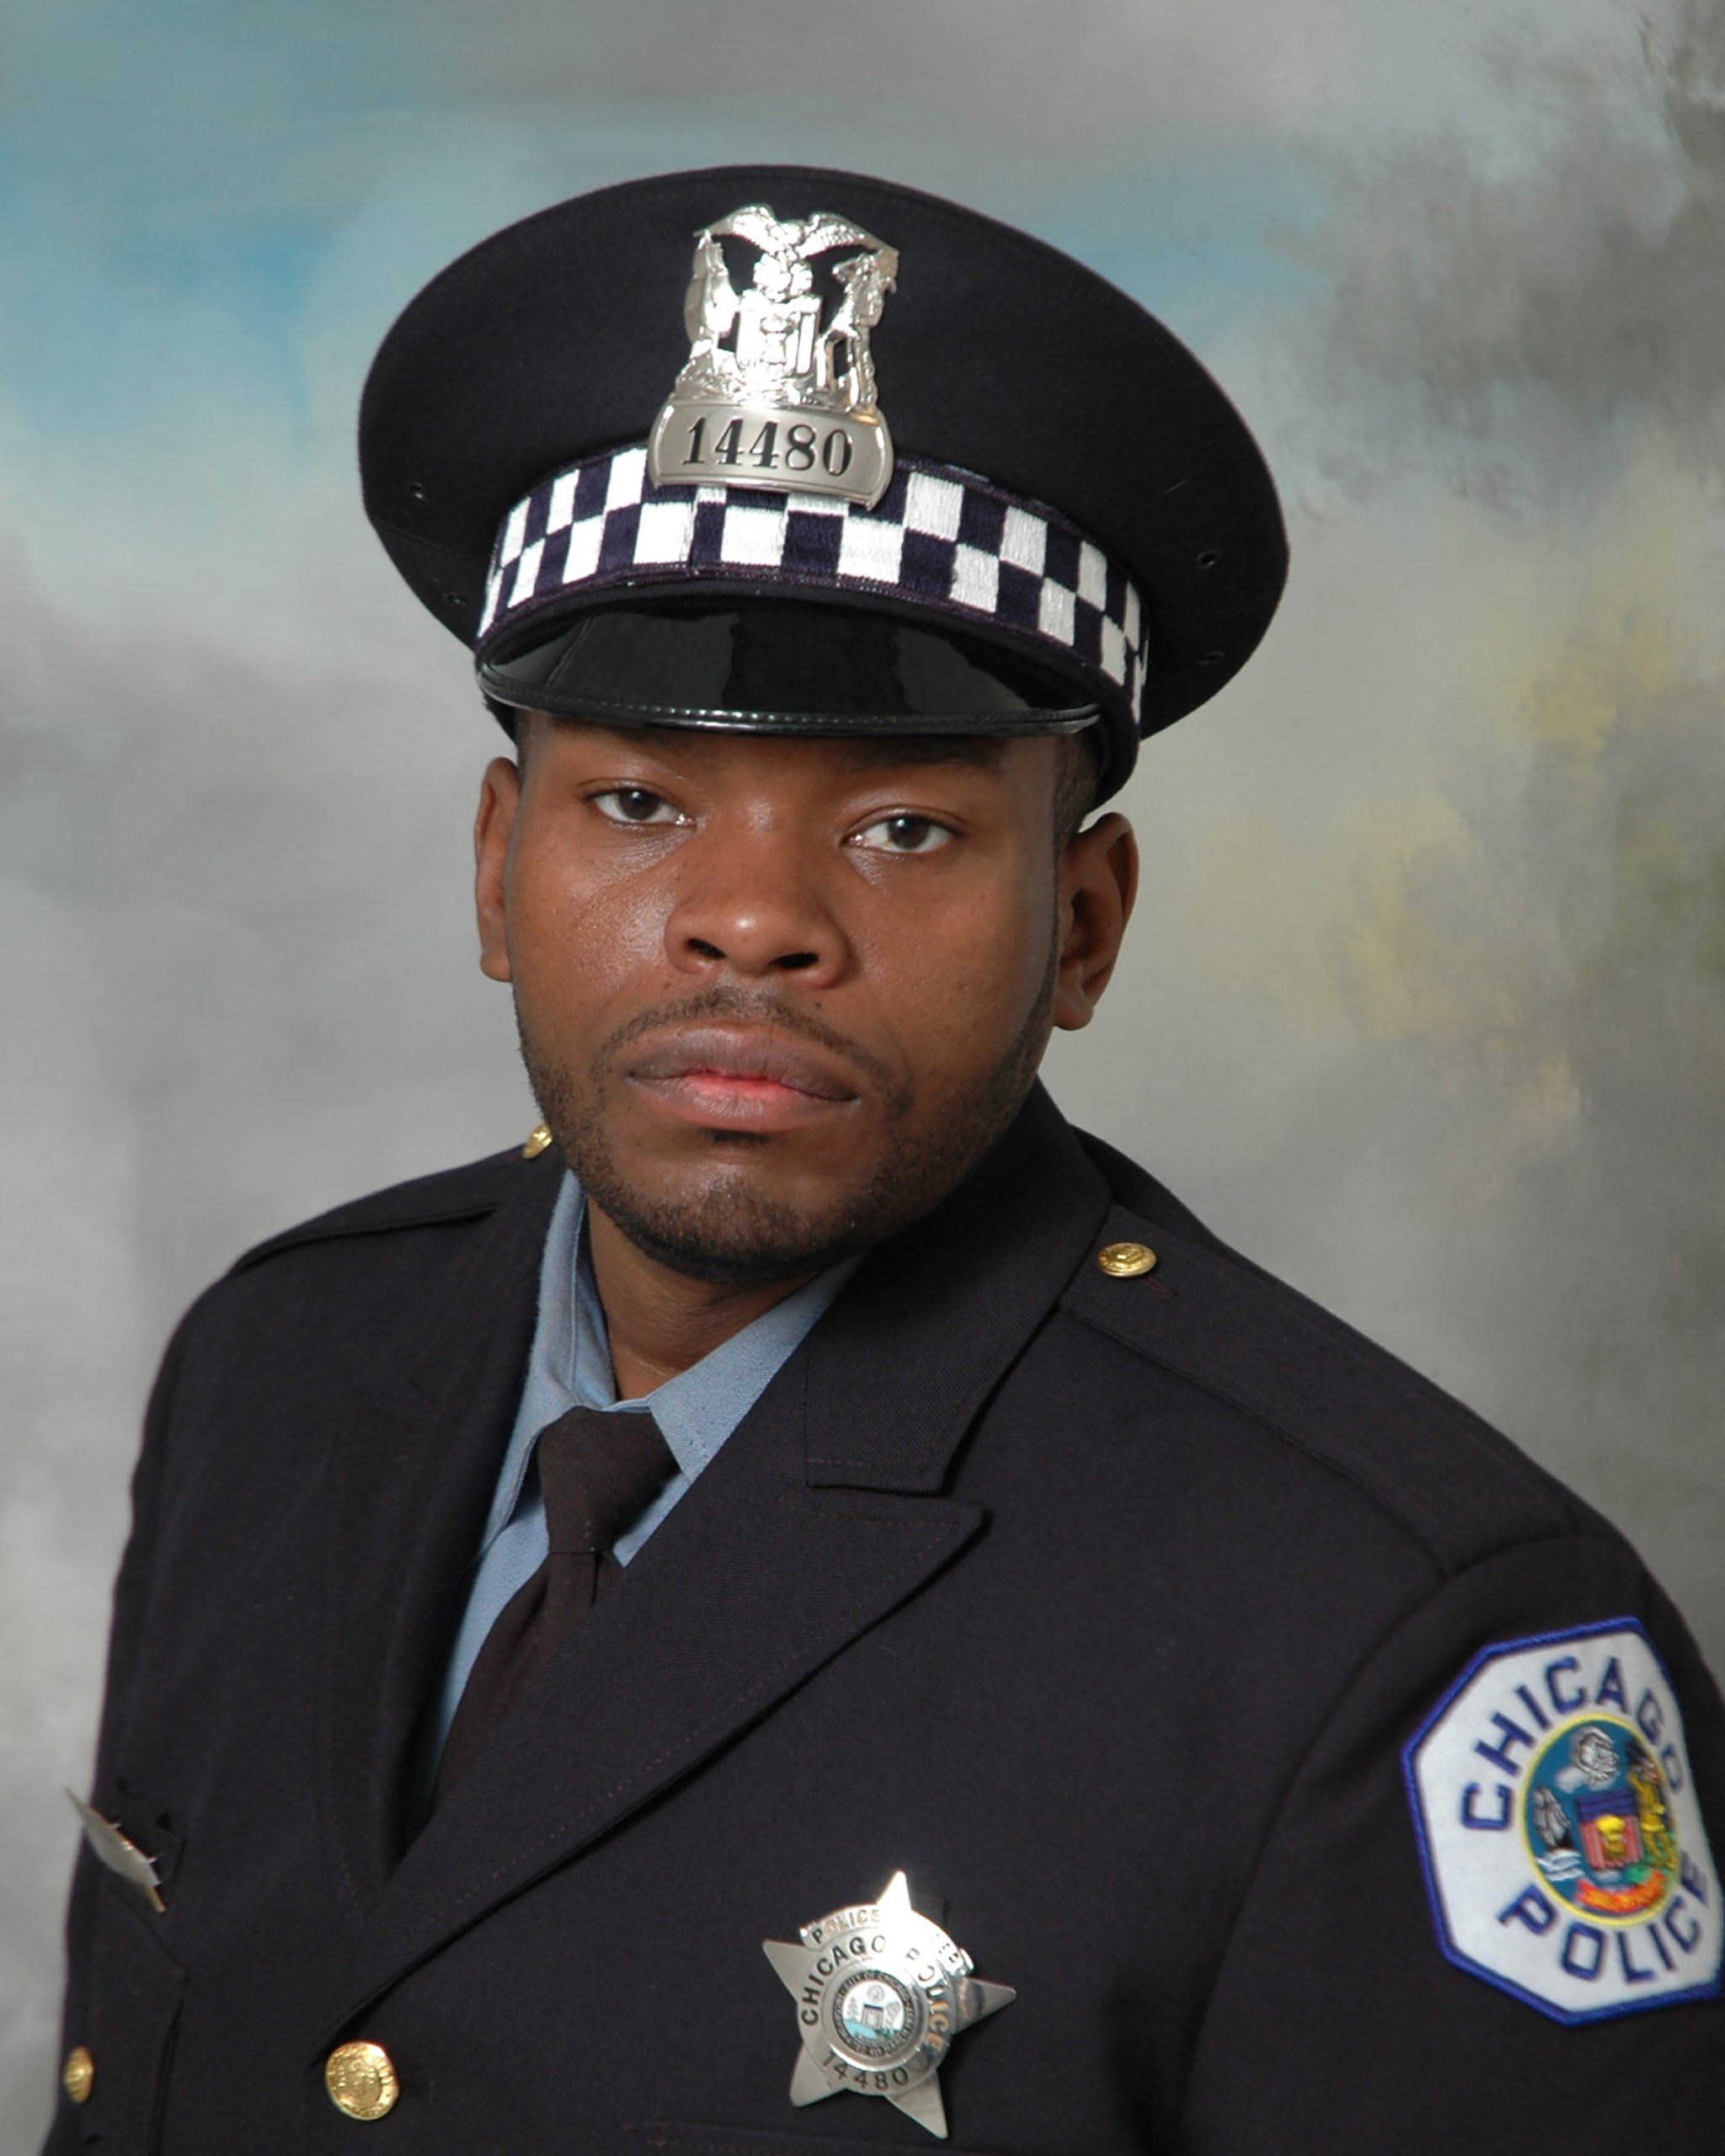 Police Officer Titus T. Moore, Chicago Police Department, Illinois